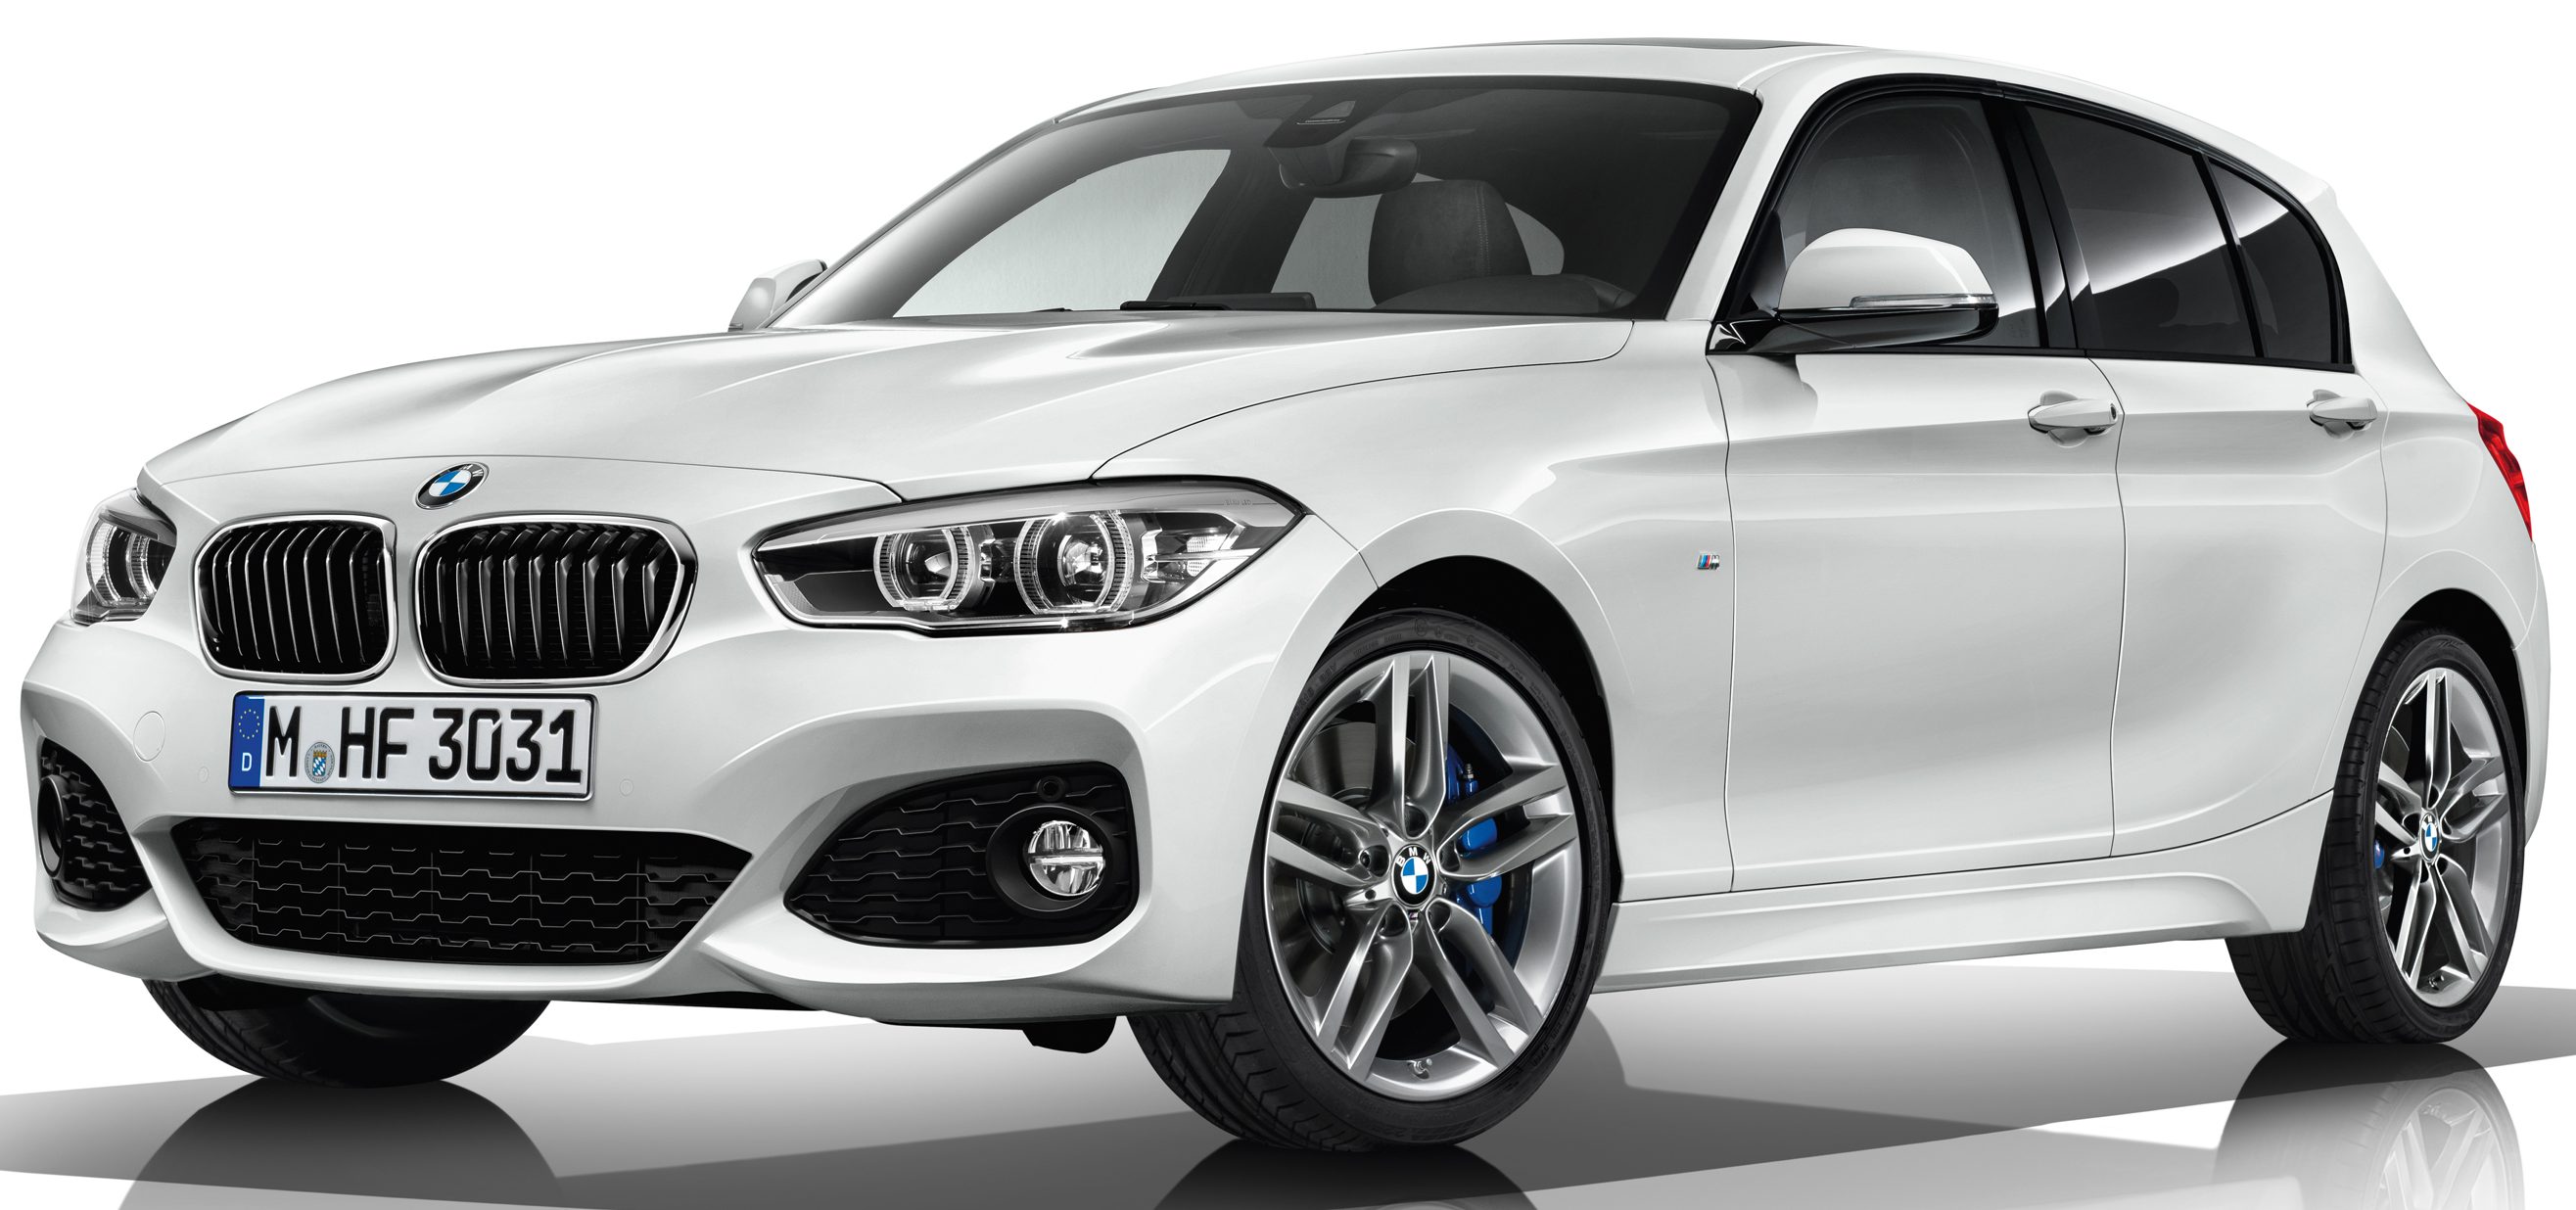 BMW 1 Series and 2 Series get more powerful engines for 2017 MY - 230i ...